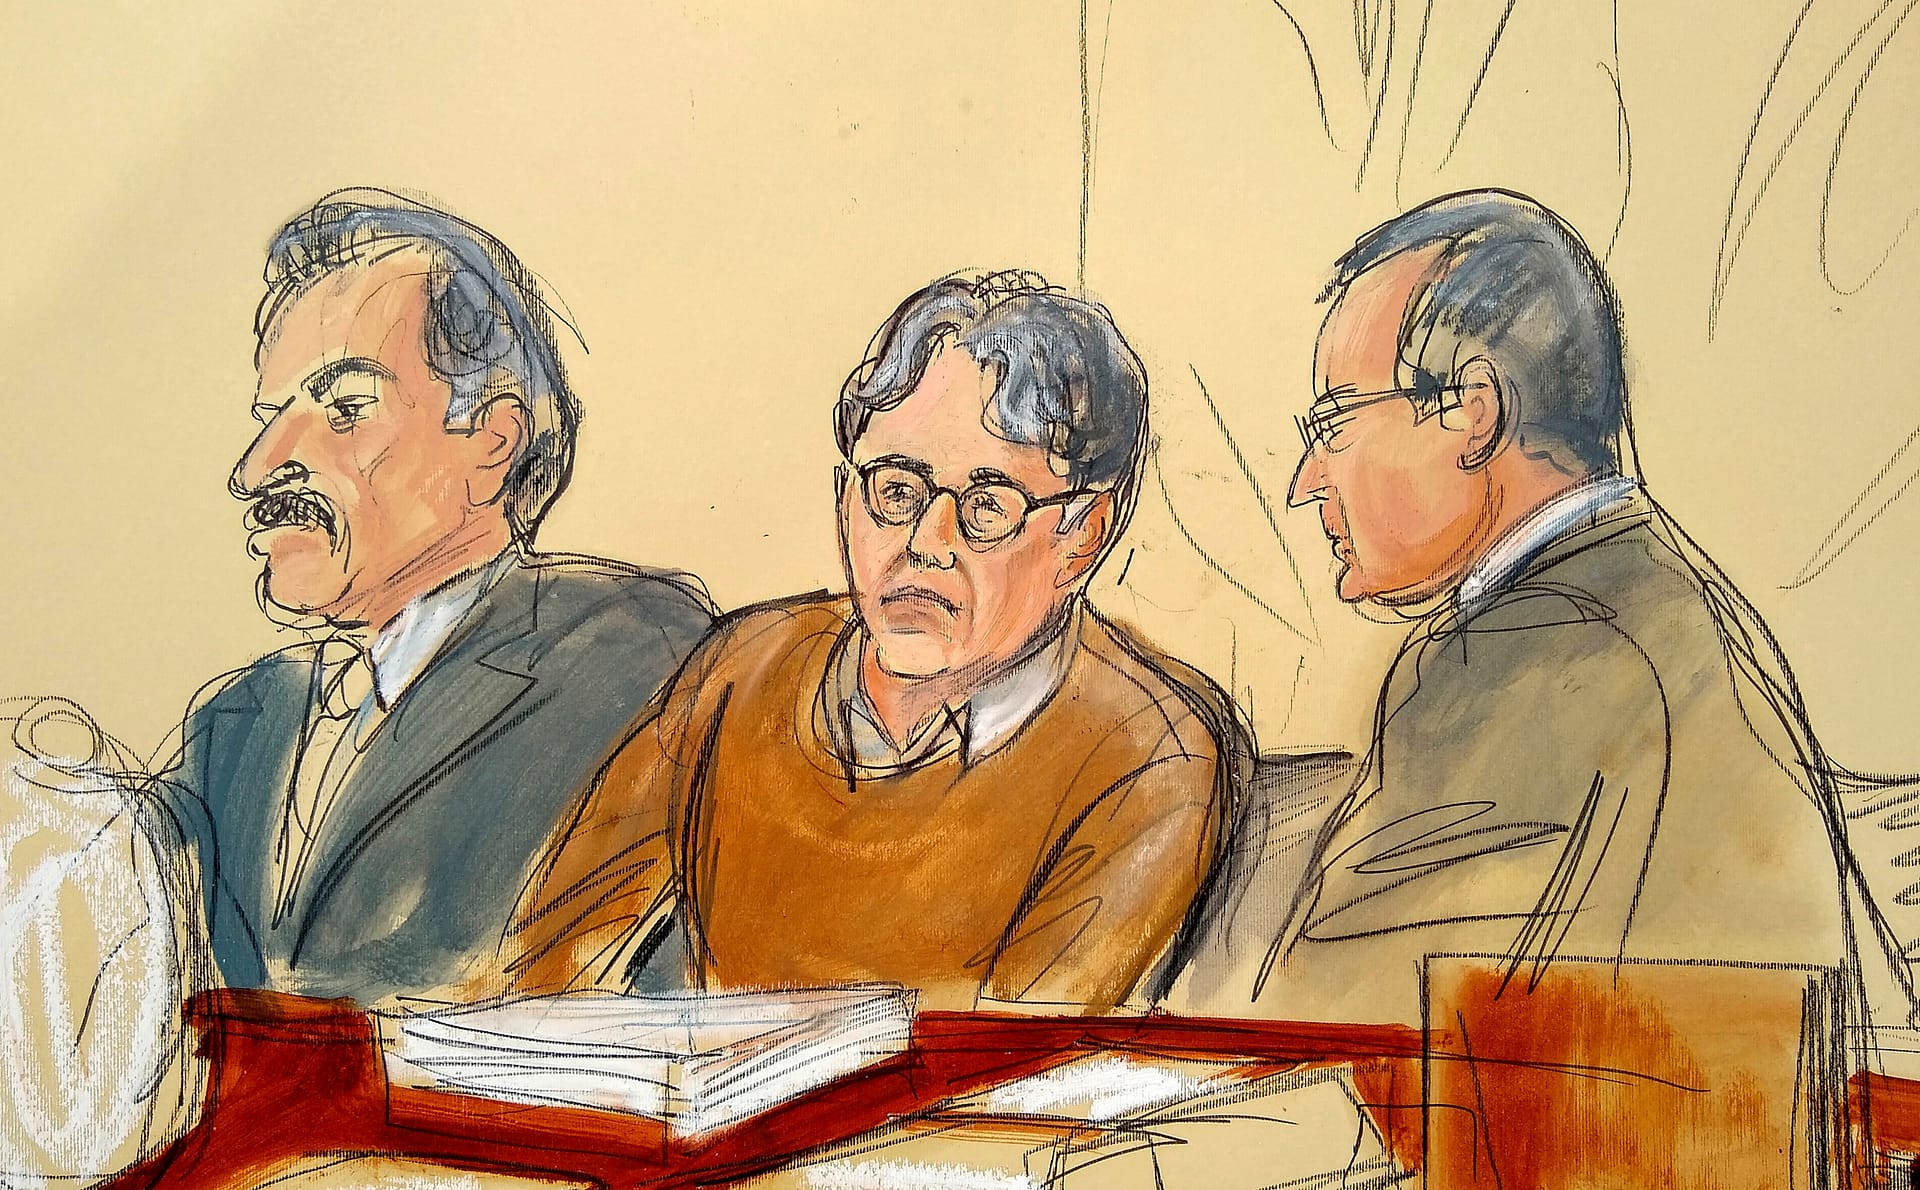 NXIVM cult leader Keith Raniere was beaten in prison by fellow sex offender, lawsuit says